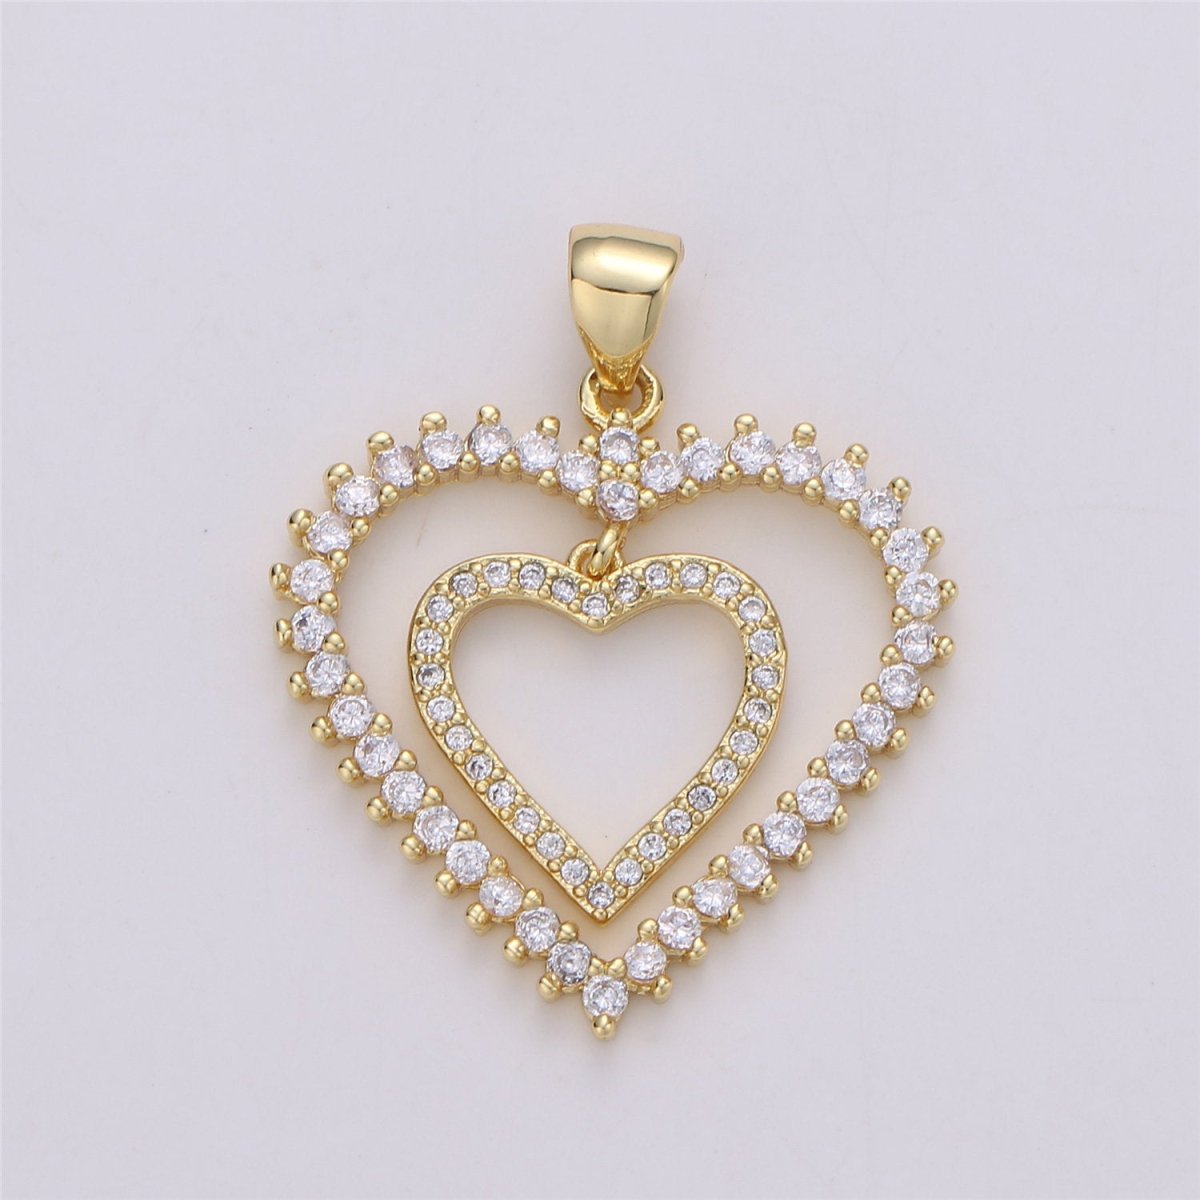 24K Gold Filled Dainty Dangle Twin Heart Pendant with Micro Pave Cubic Zirconia CZ Stone for Family Lover Necklace or Bracelet I-594 - DLUXCA